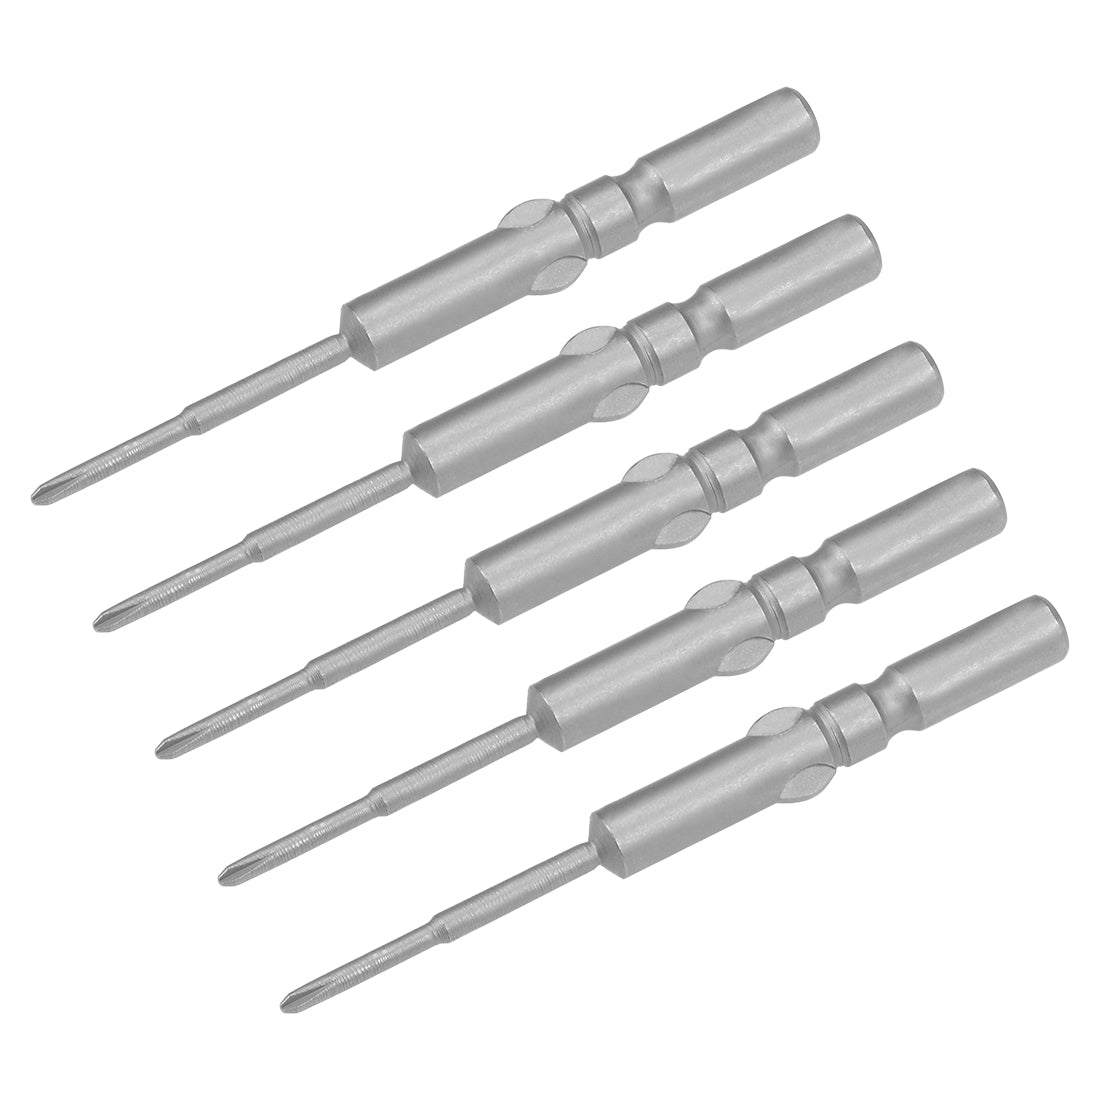 Uxcell Uxcell Phillips Bits 5pcs 5mm Round Shank Magnetic Cross 1.6PH00 Screwdriver Bit Set 60mm Length S2 Screw Driver Kit Tools